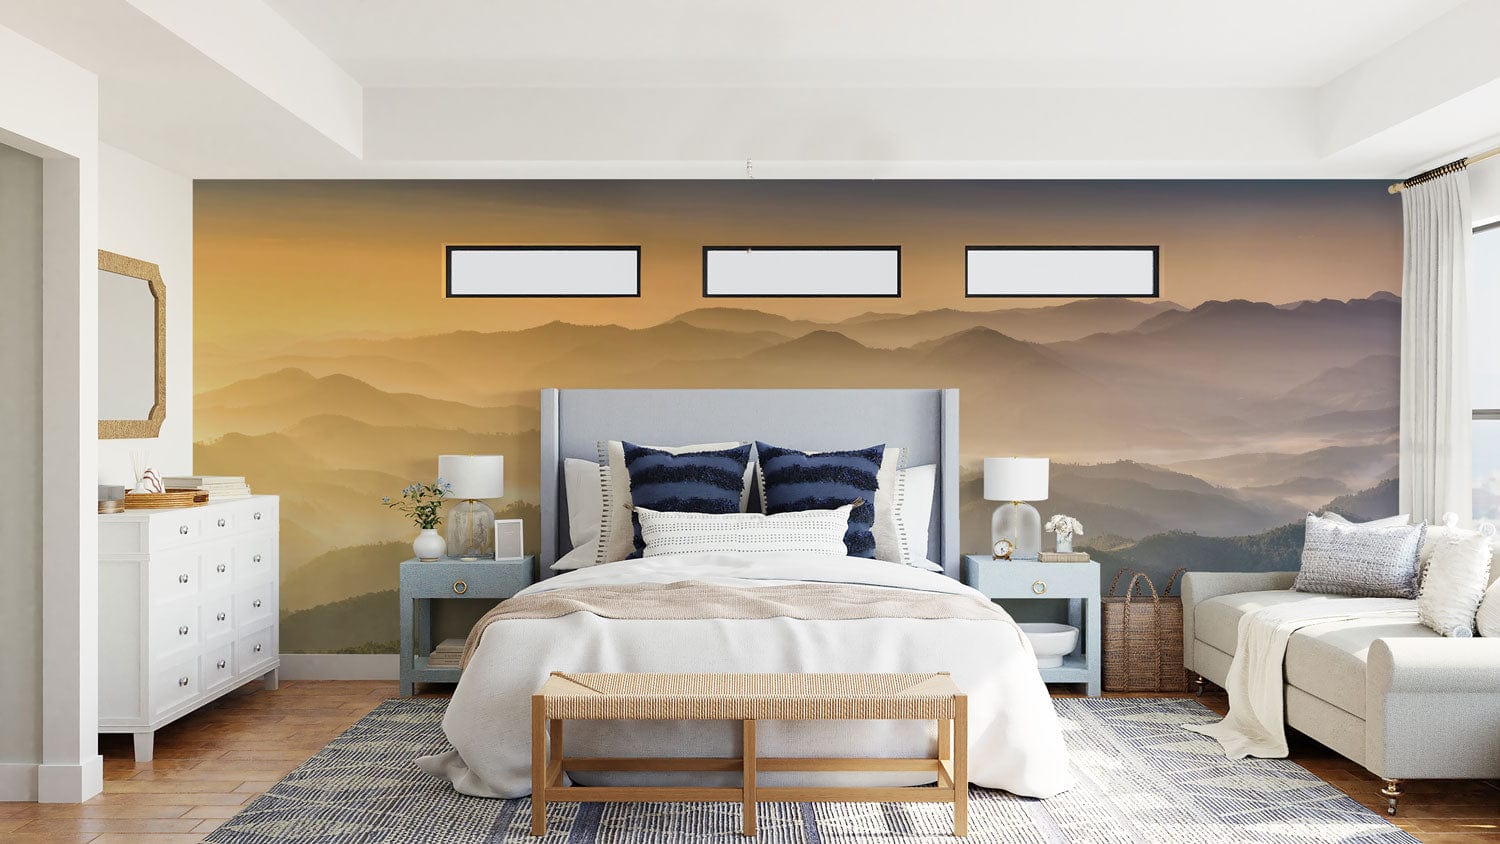 Wallpaper mural for the bedroom decor featuring mountains enjoying the sunshine